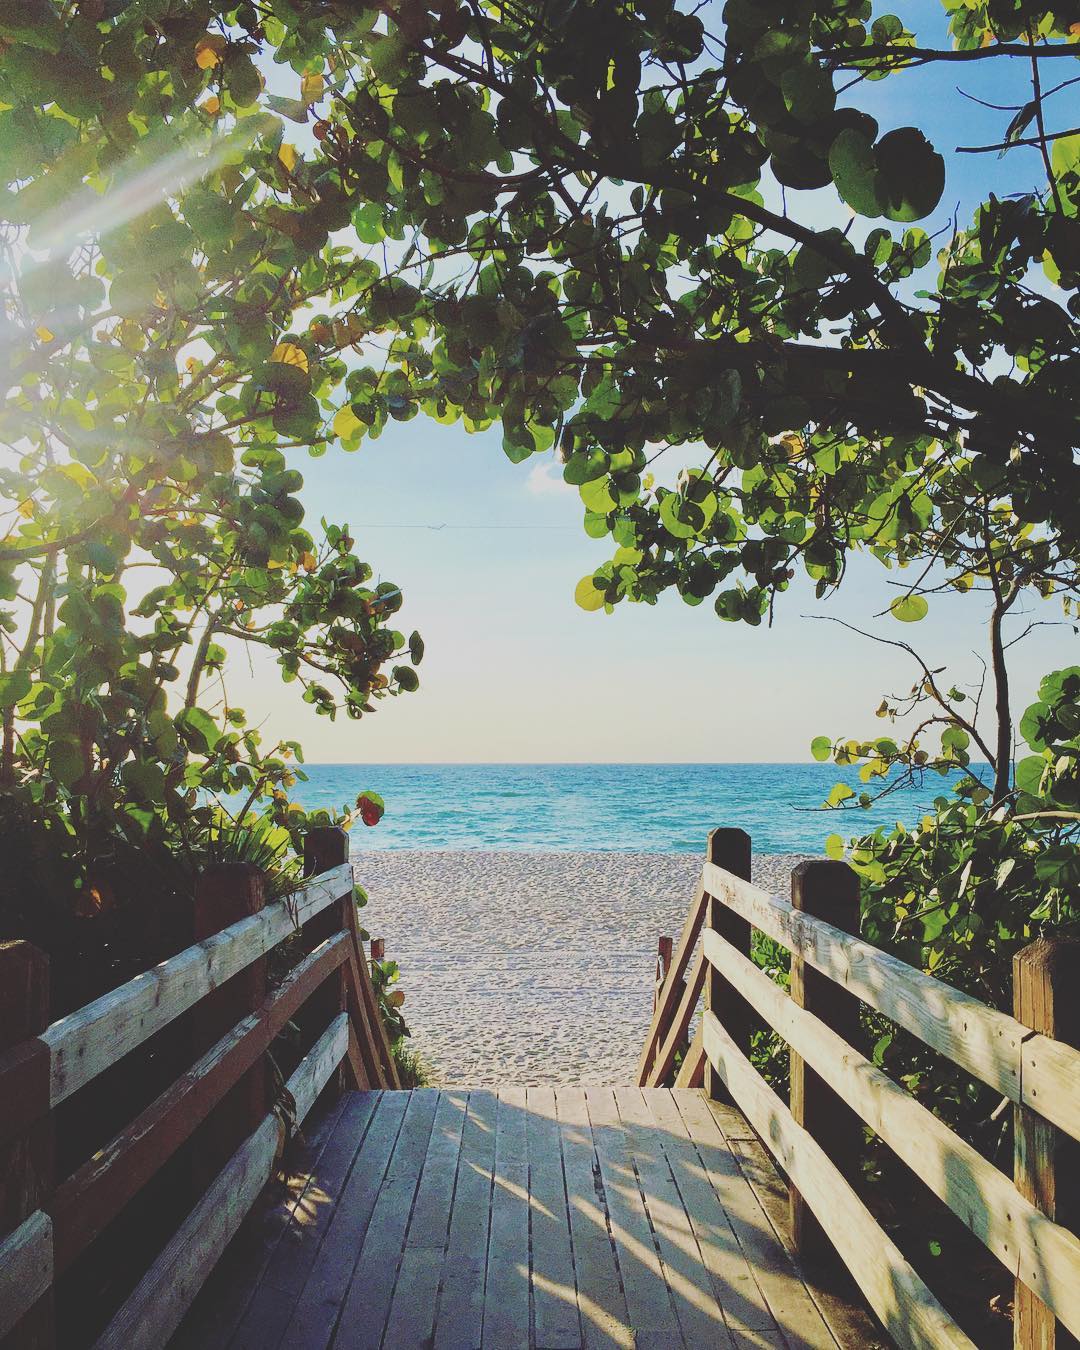 Bridge Leading to a Gorgeous White Sand Beach in Clearwater, FL. Photo by Instagram user @hflora